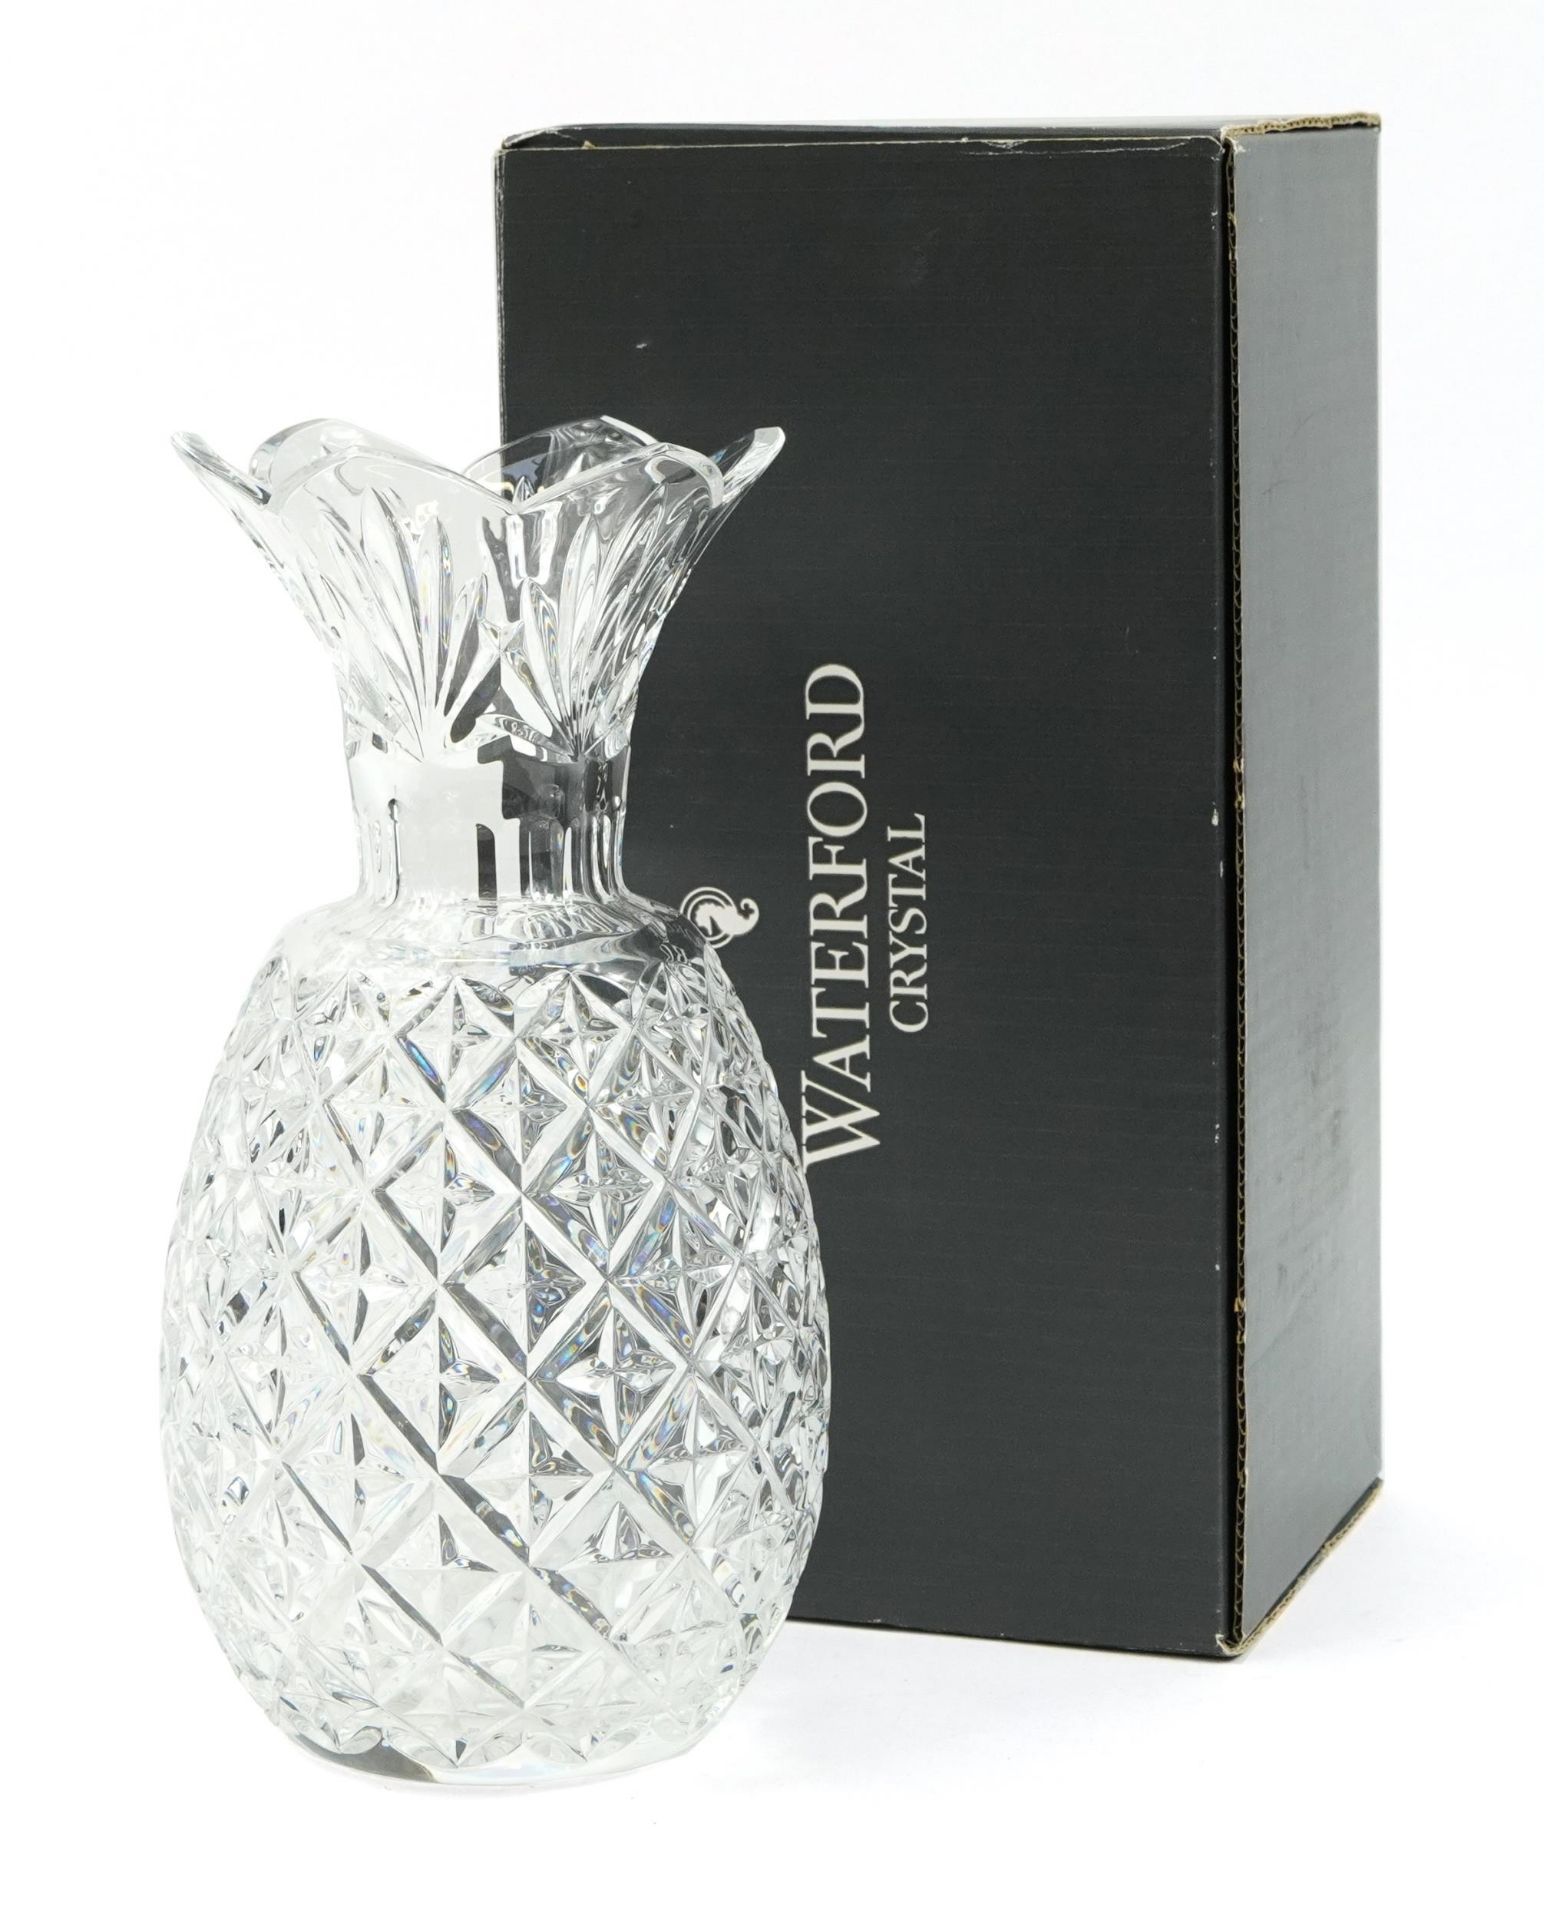 Waterford Crystal twelve inch pineapple vase with box, 30cm high